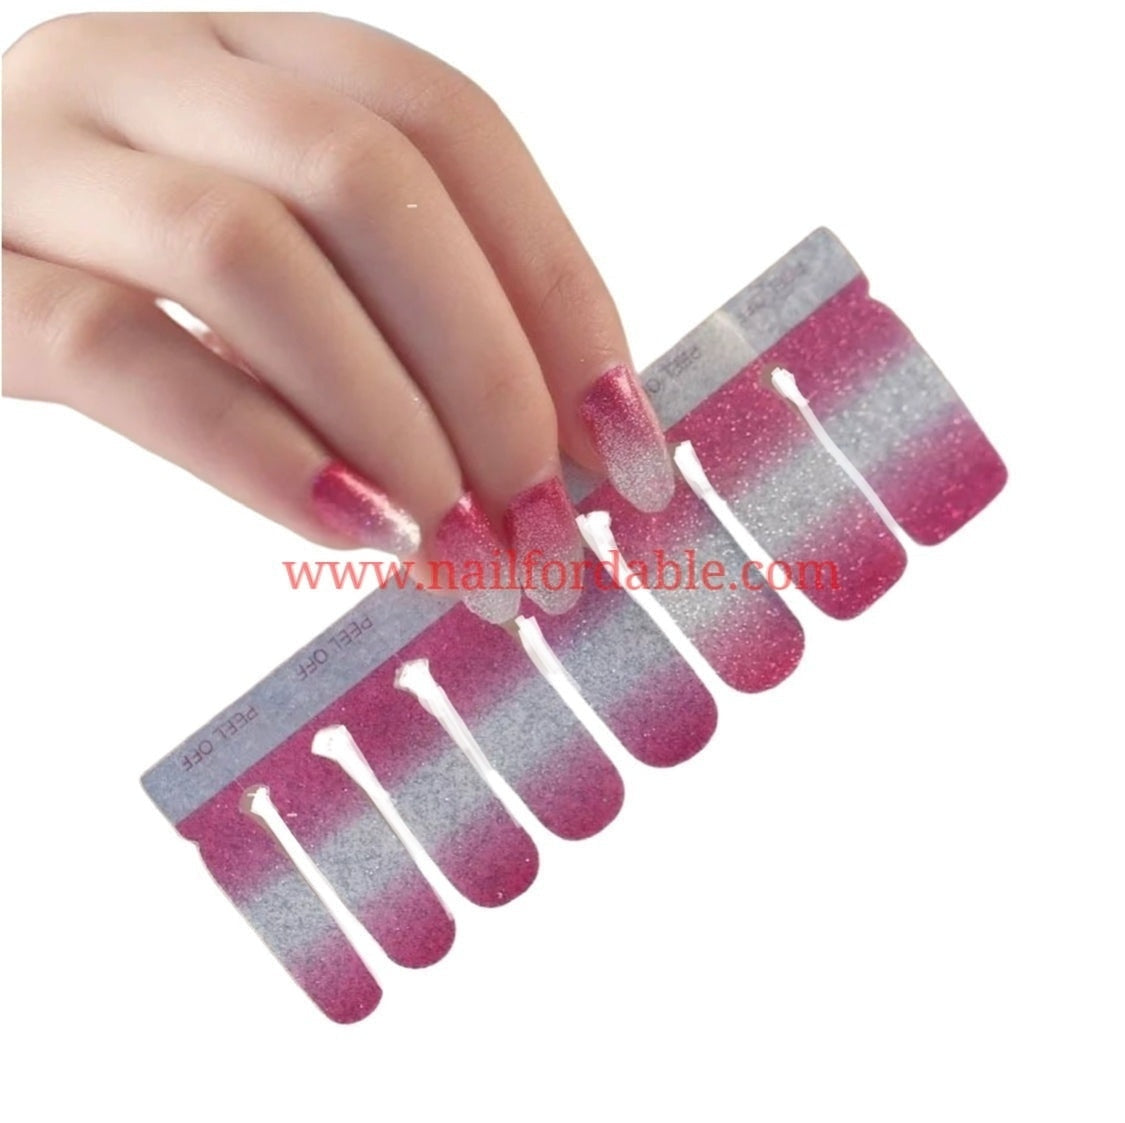 Pink and Silver gradient Nail Wraps | Semi Cured Gel Wraps | Gel Nail Wraps |Nail Polish | Nail Stickers